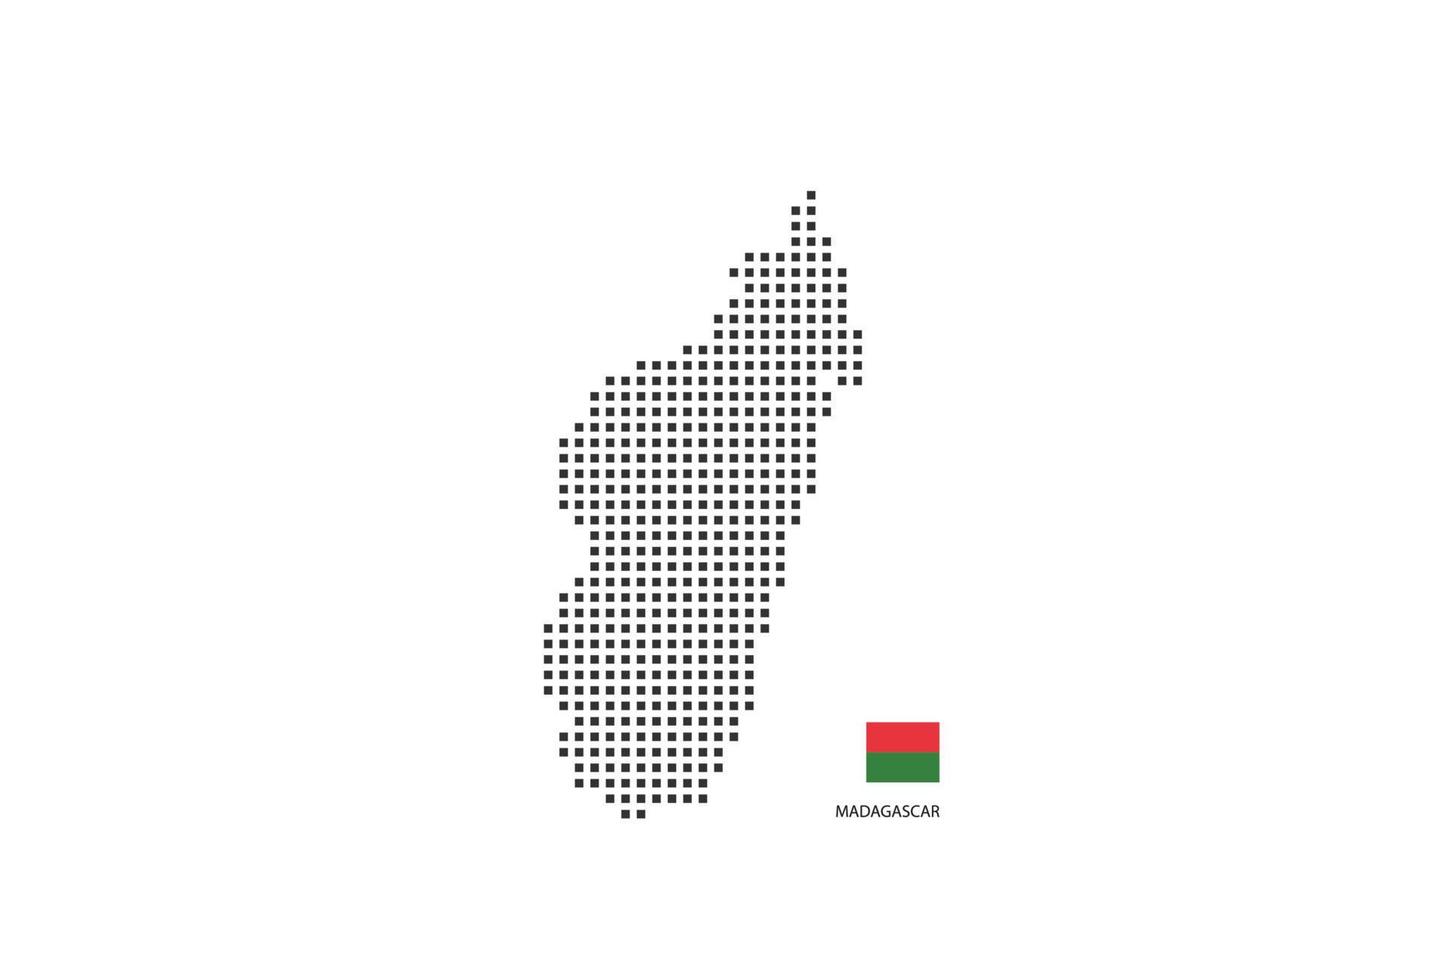 Vector square pixel dotted map of Madagascar isolated on white background with Madagascar flag.